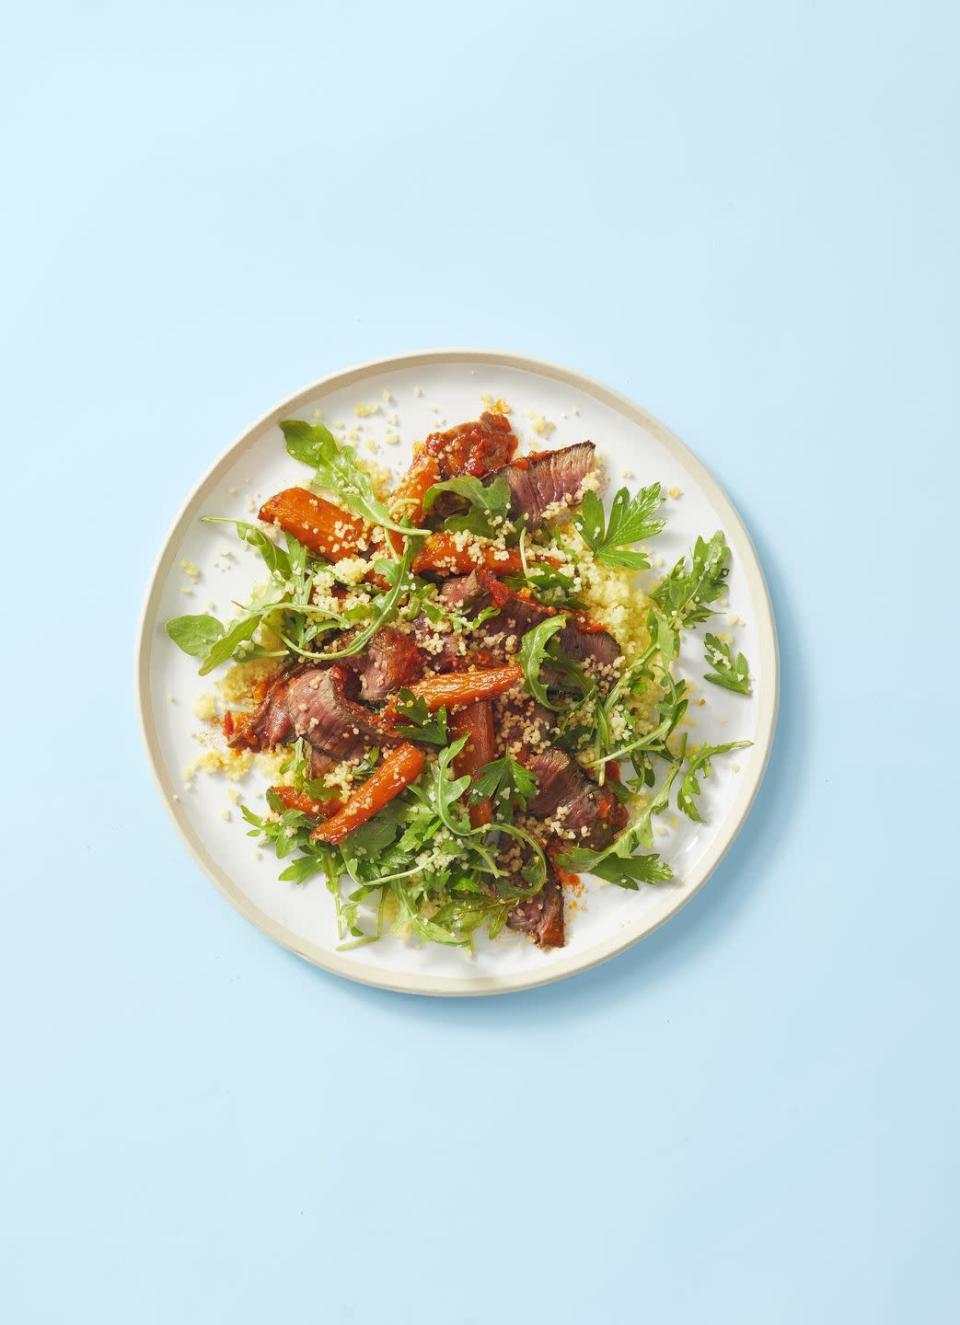 <p>A tablespoon of harissa — a Tunisian hot chili pepper paste — is all you need to spice up a sirloin. After trying it with couscous and peppery arugula, you won't miss boring ol' steak and potatoes one bit. </p><p><em><a href="https://www.goodhousekeeping.com/food-recipes/a30392206/harissa-sirloin-with-couscous-salad-recipe/" rel="nofollow noopener" target="_blank" data-ylk="slk:Get the recipe for Harissa Sirloin With Couscous Salad »" class="link rapid-noclick-resp">Get the recipe for Harissa Sirloin With Couscous Salad »</a></em></p>